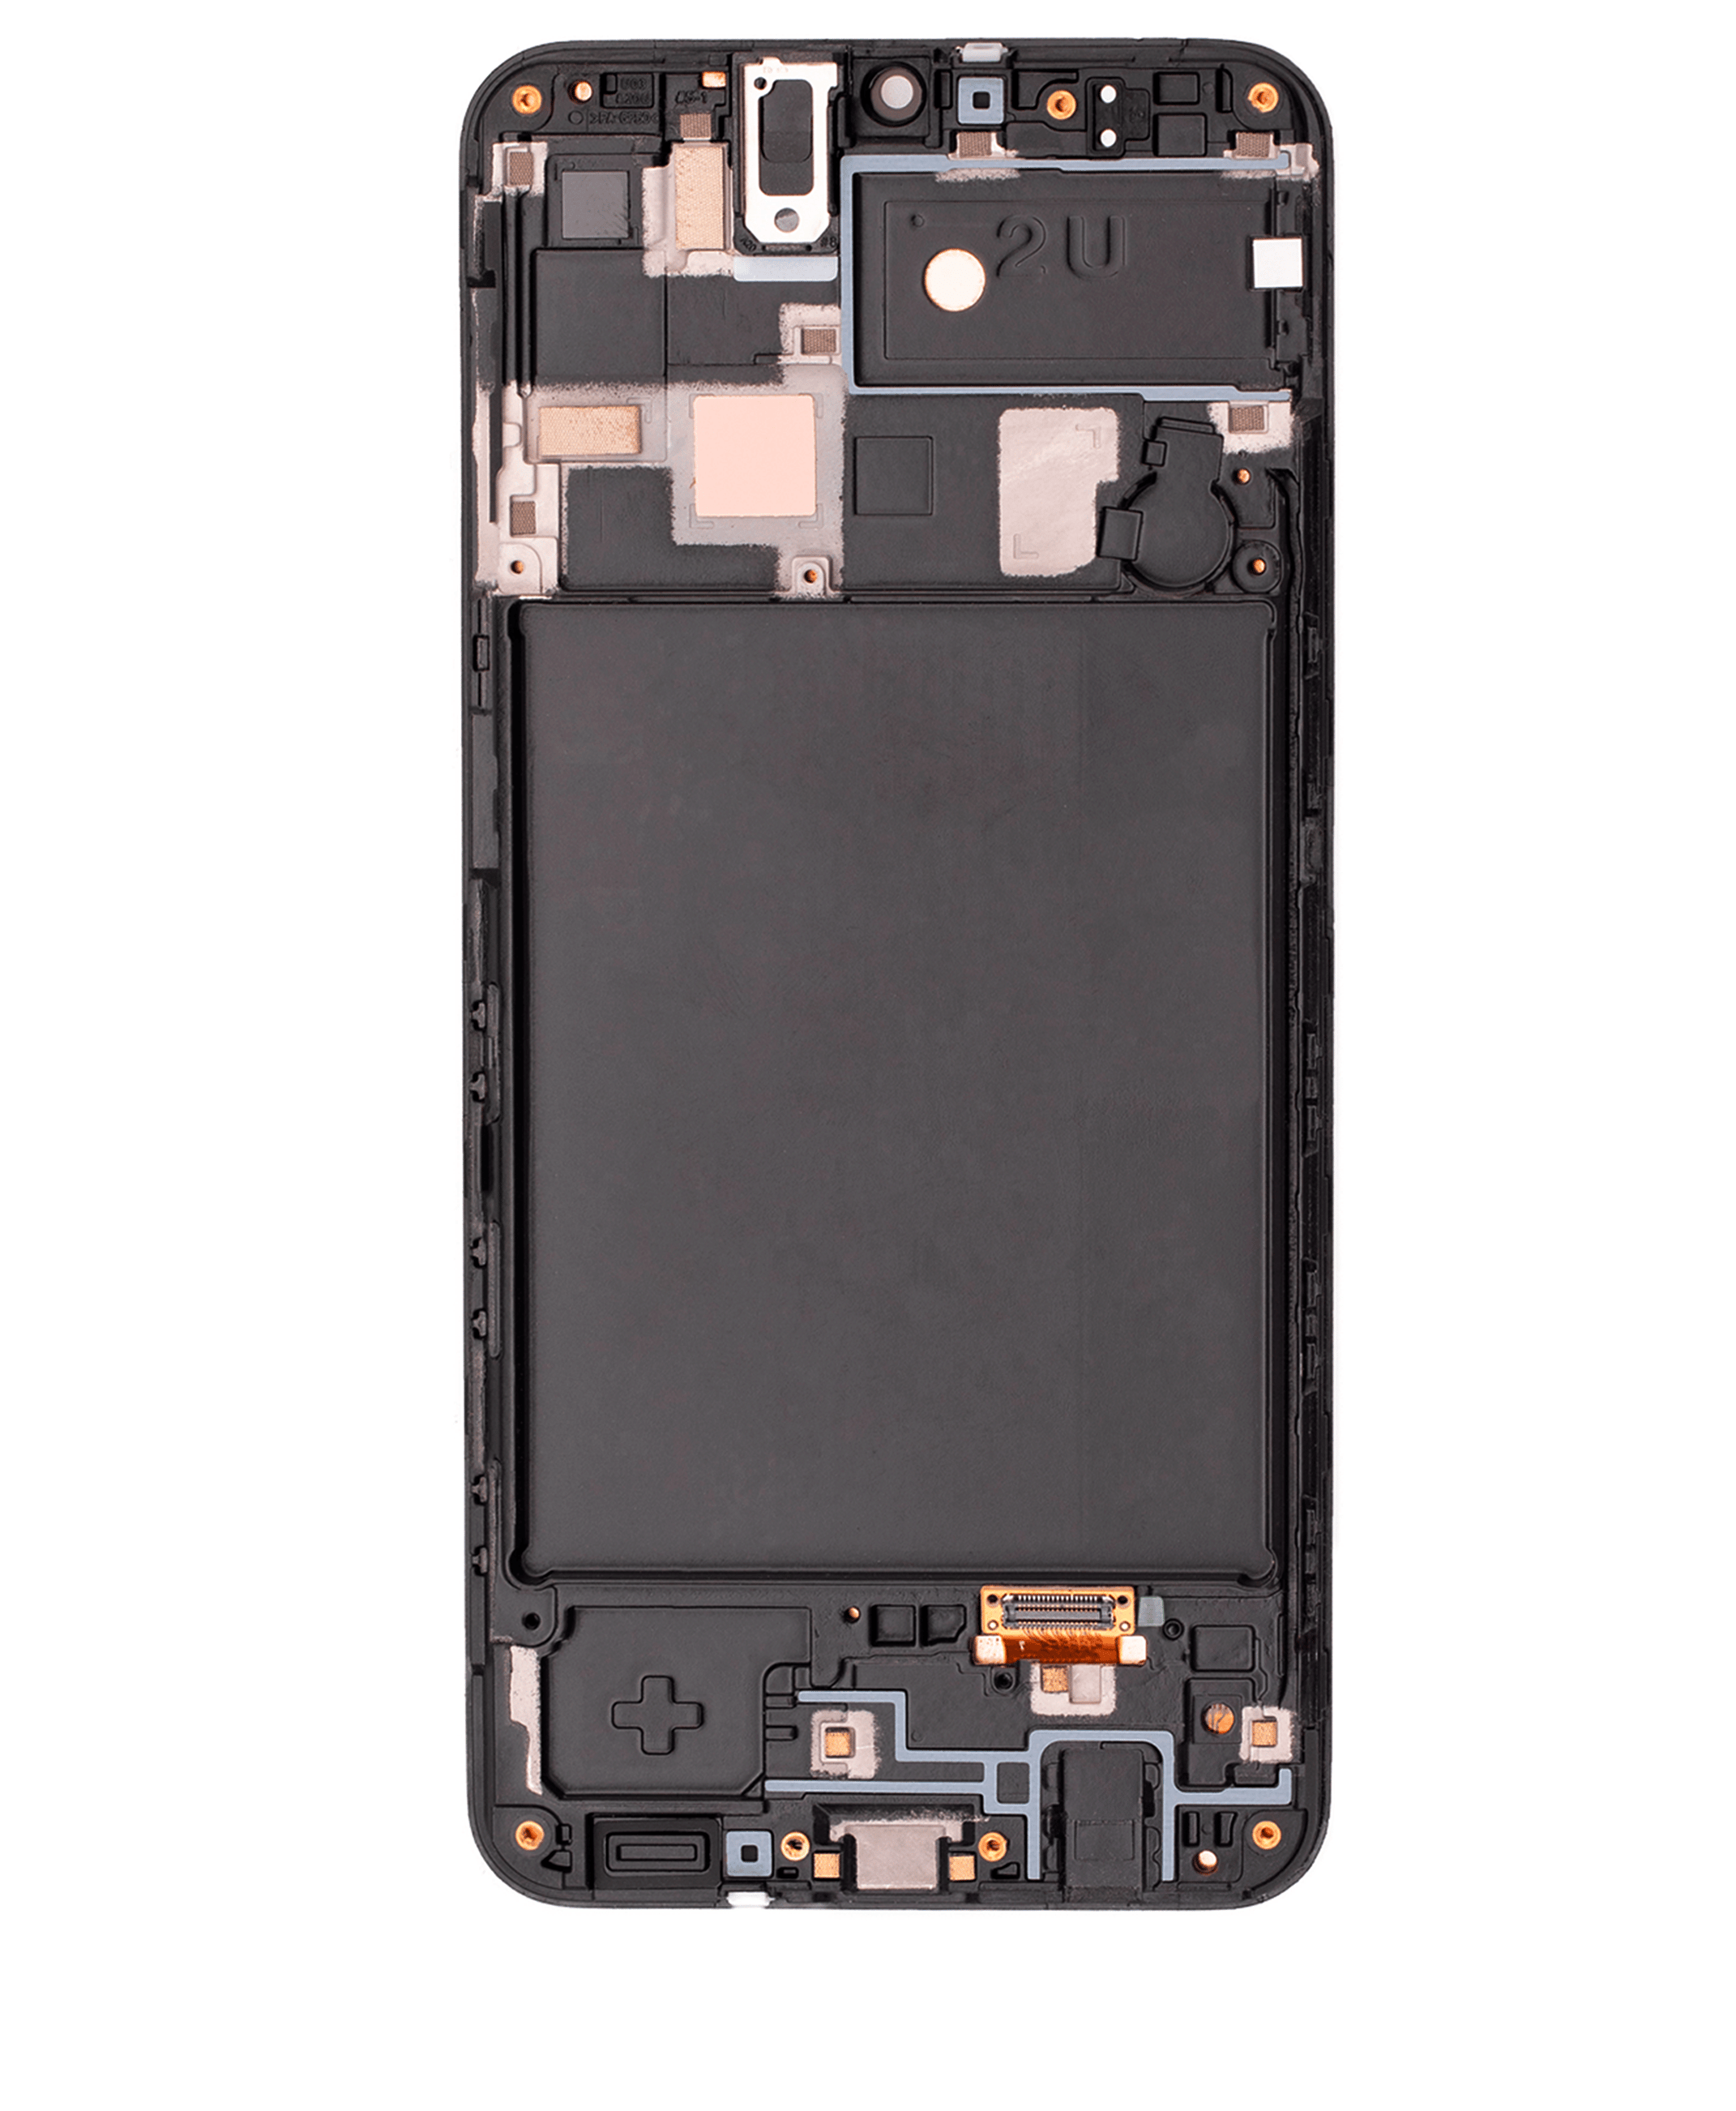 For Samsung Galaxy A20 (A205U / 2019) LCD Screen Replacement With Frame (Aftermarket Pro) (All Colors)